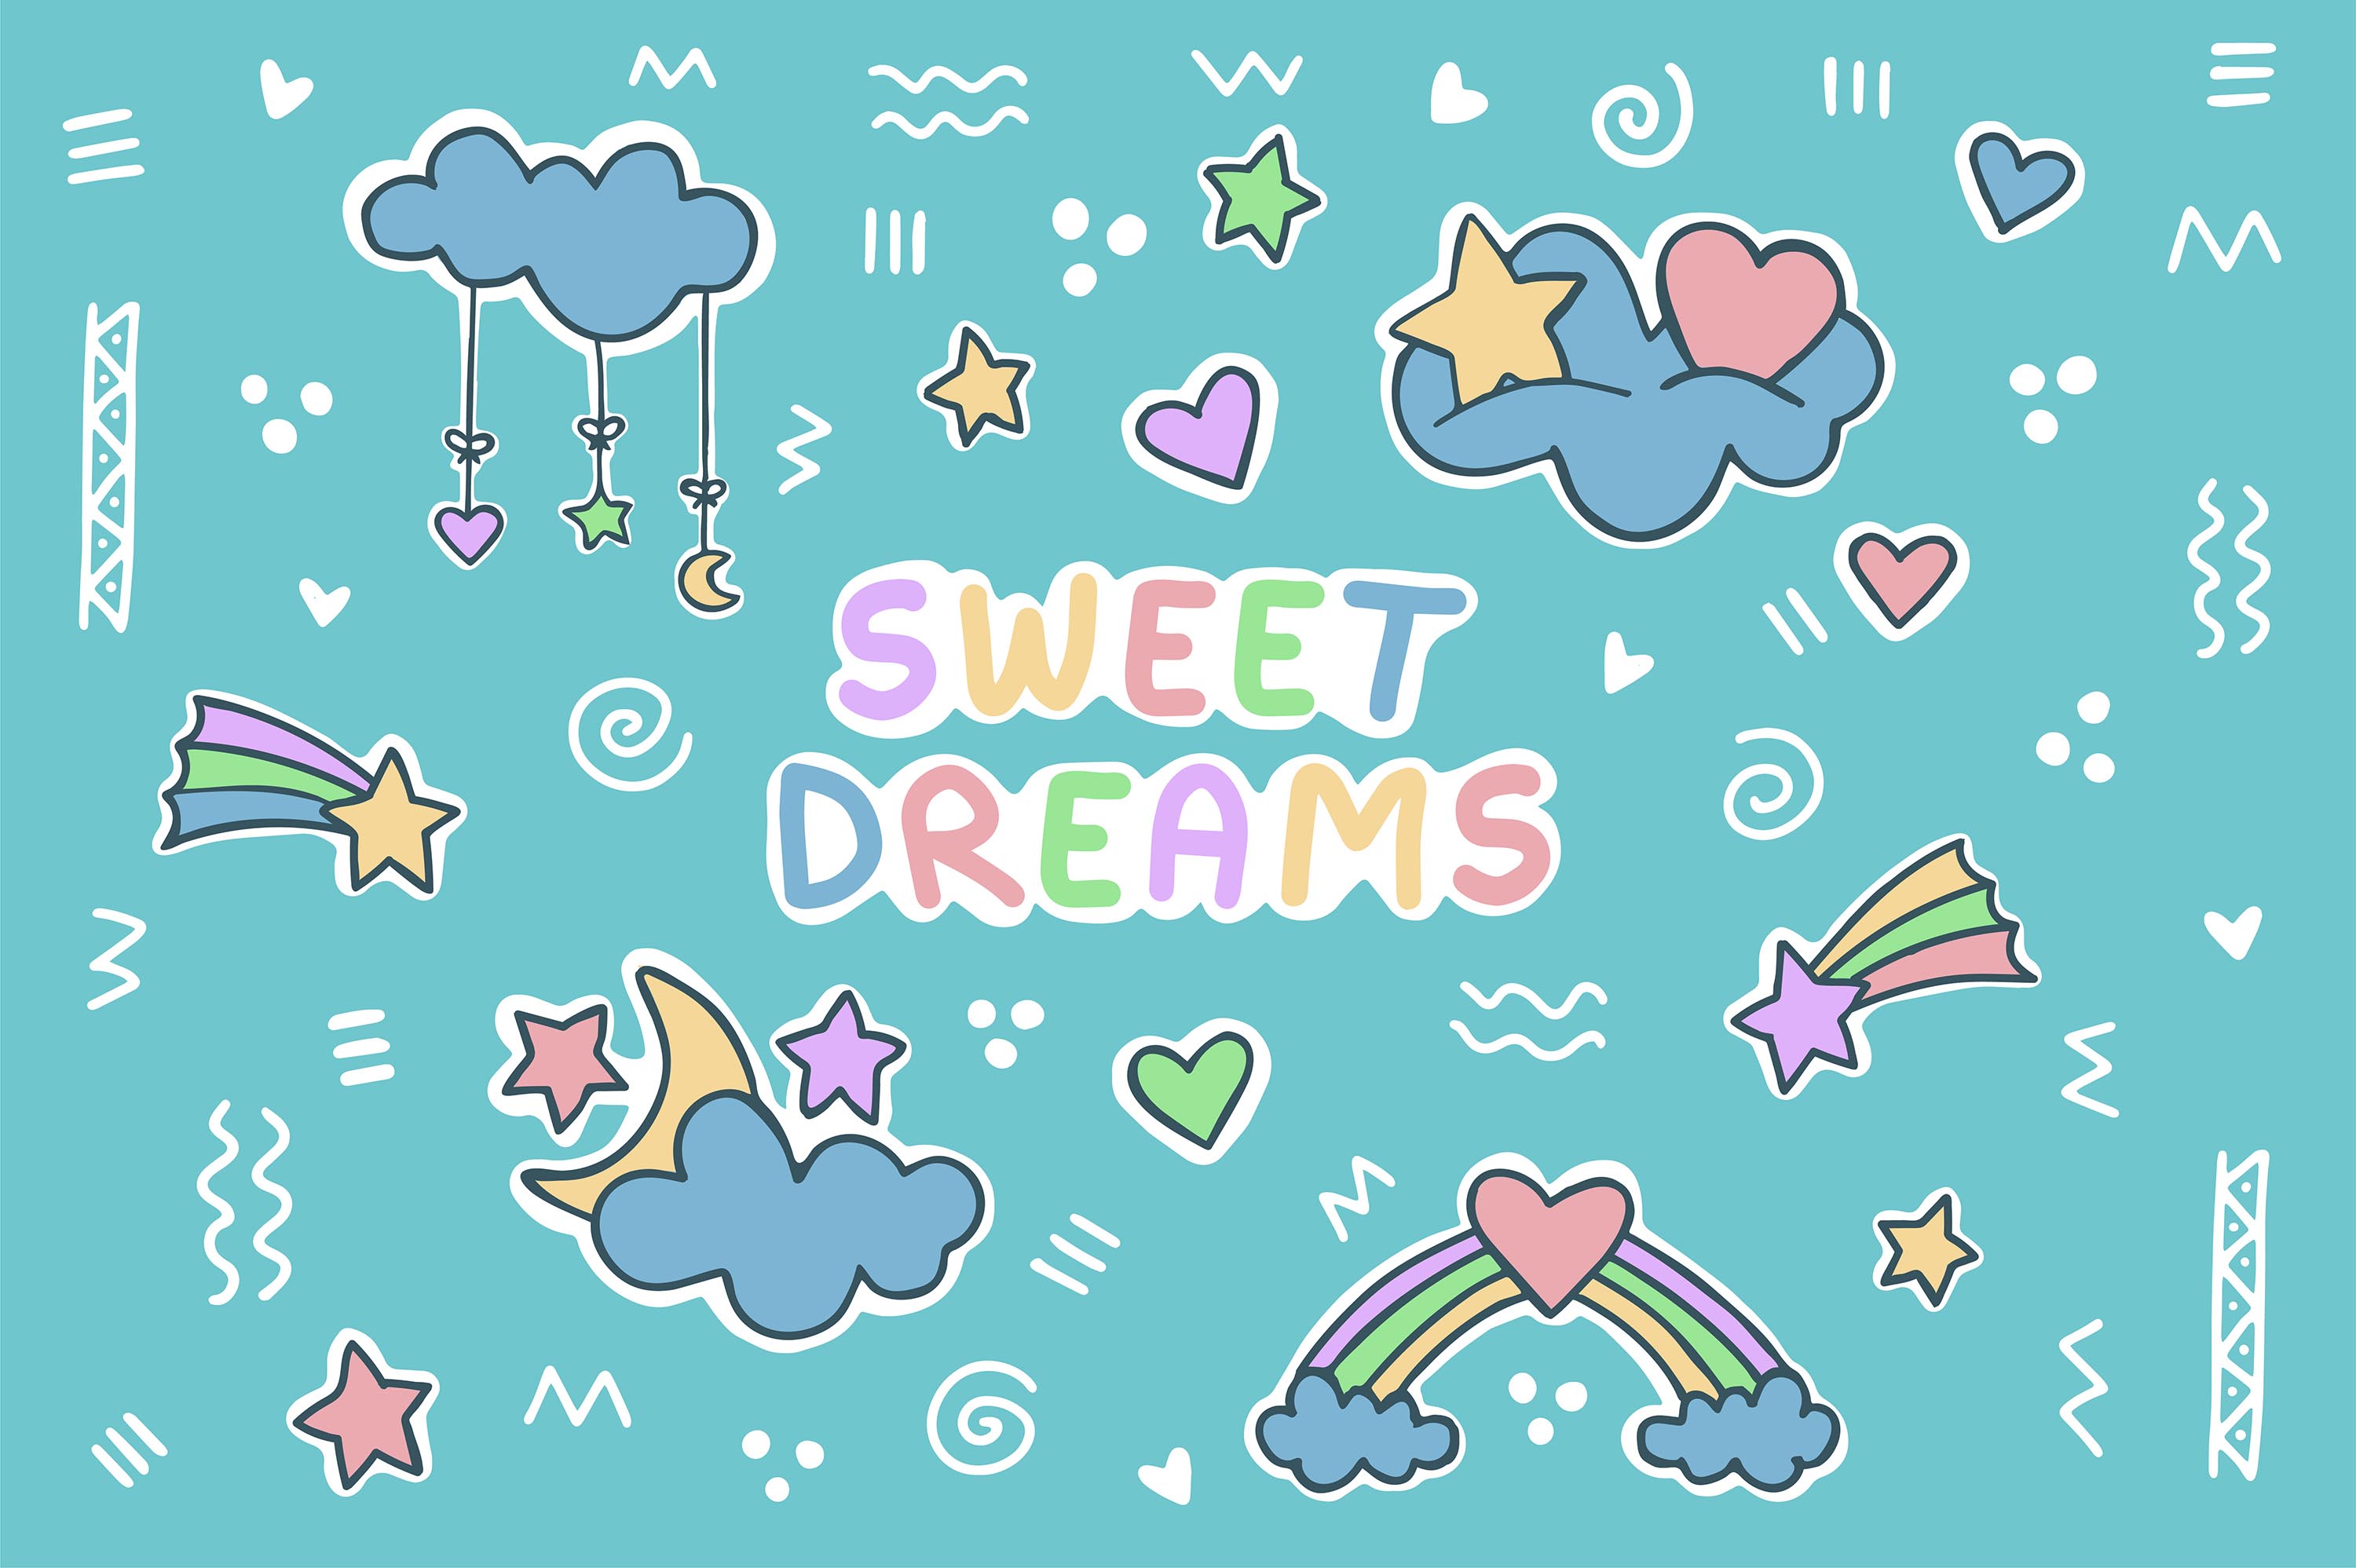 Sweet Dreams Baby Stickers and Posters for kids design.